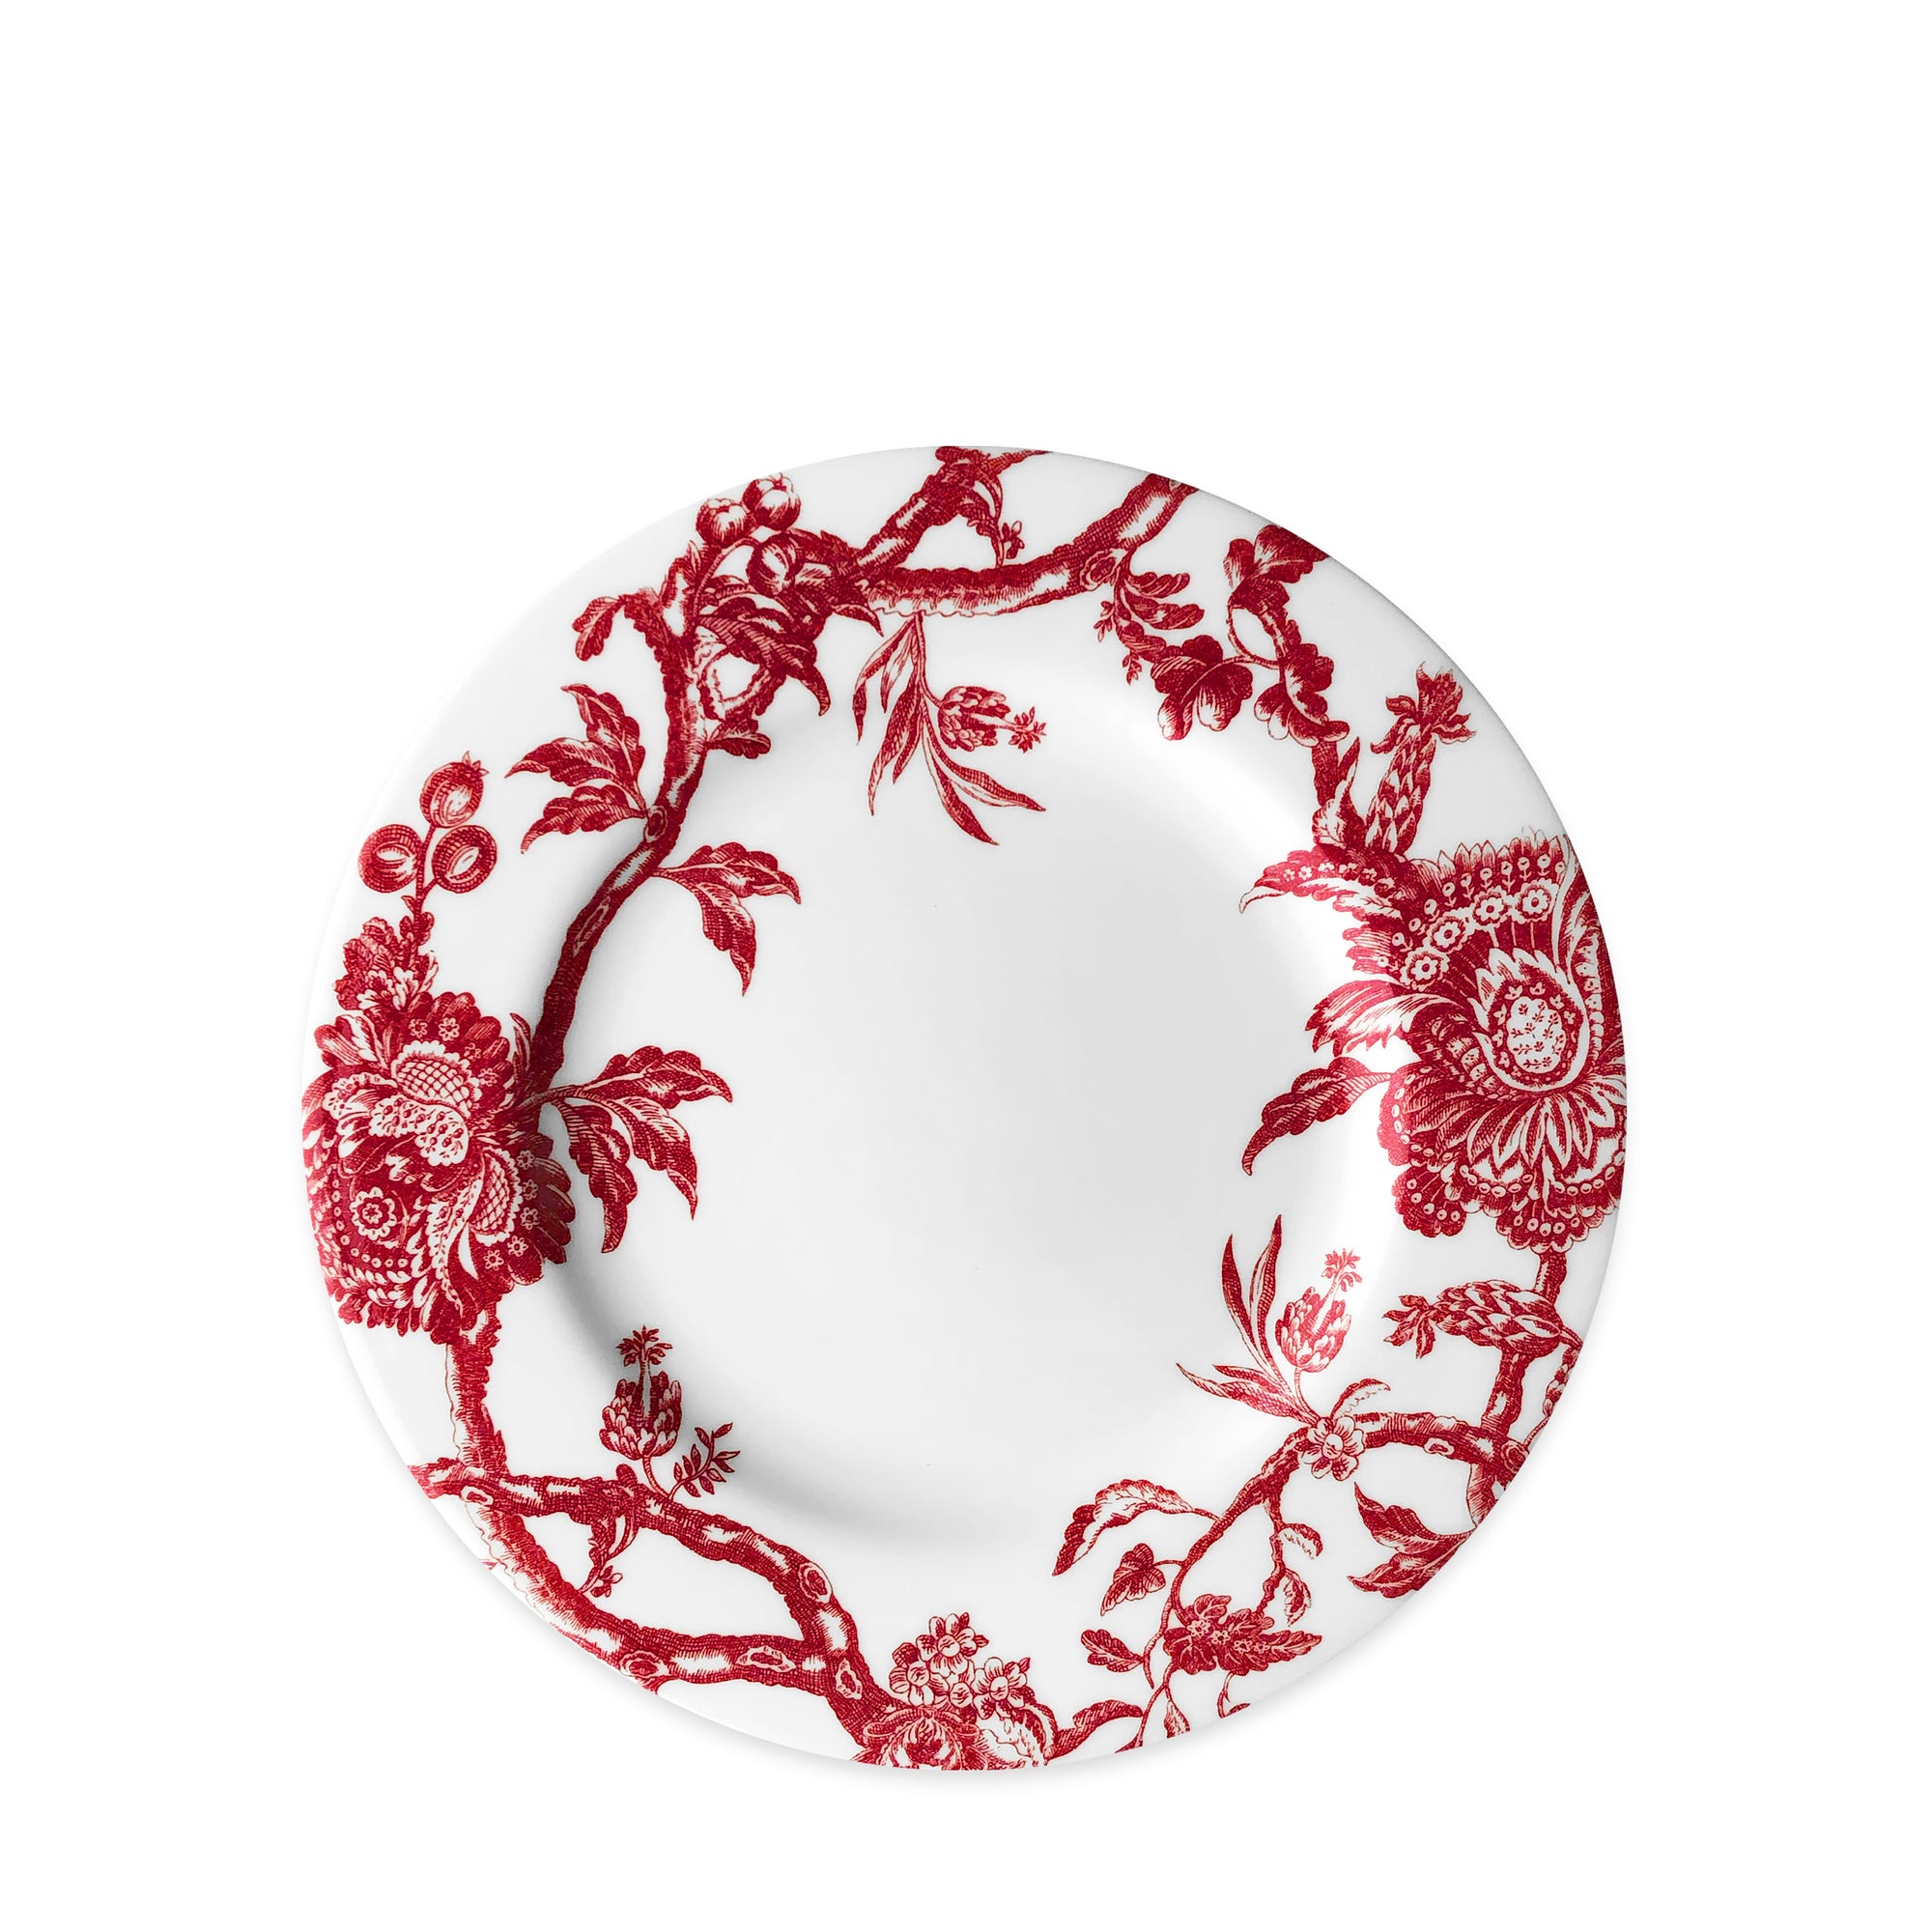 A Caskata Artisanal Home Arcadia Crimson Rimmed Salad Plate with a decorative red floral and branch pattern along the rim, crafted from premium porcelain dinnerware. It offers an heirloom feel while being dishwasher and microwave safe for everyday convenience.